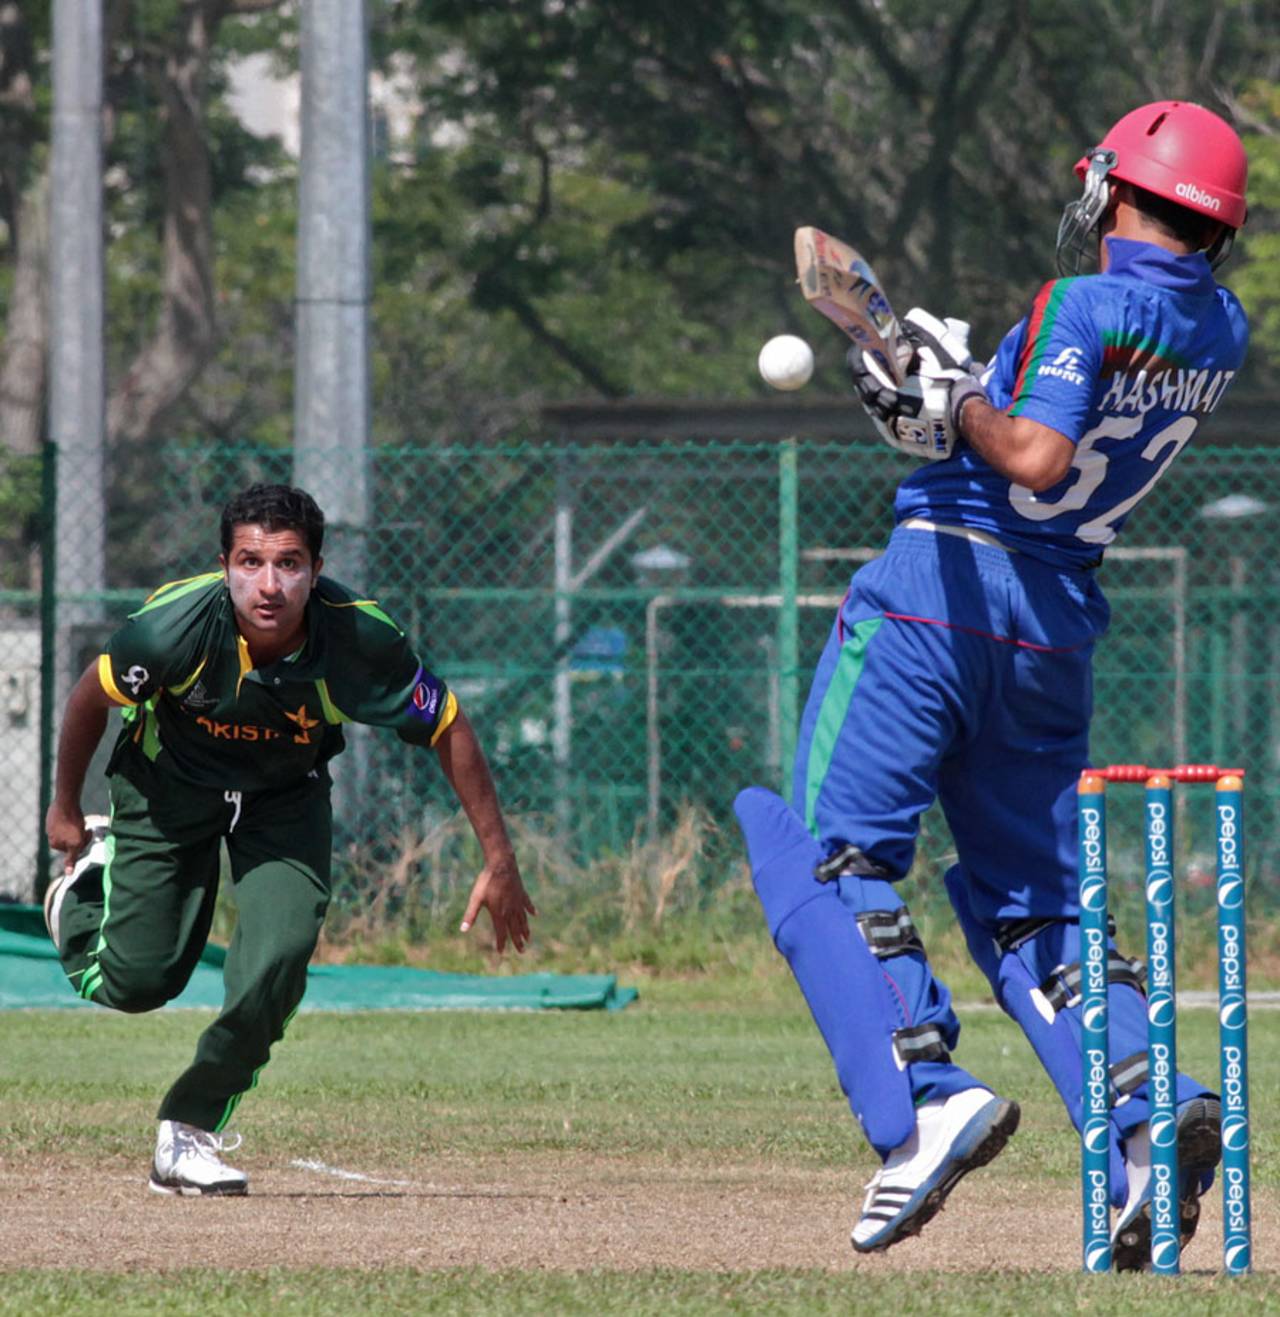 Bilawal Bhatti bowls a short ball at Hashmatullah Shaidi , Afghanistan Under-23s v Pakistan Under-23s, Group A, Asian Cricket Council Emerging Teams Cup, Singapore, August 19, 2013